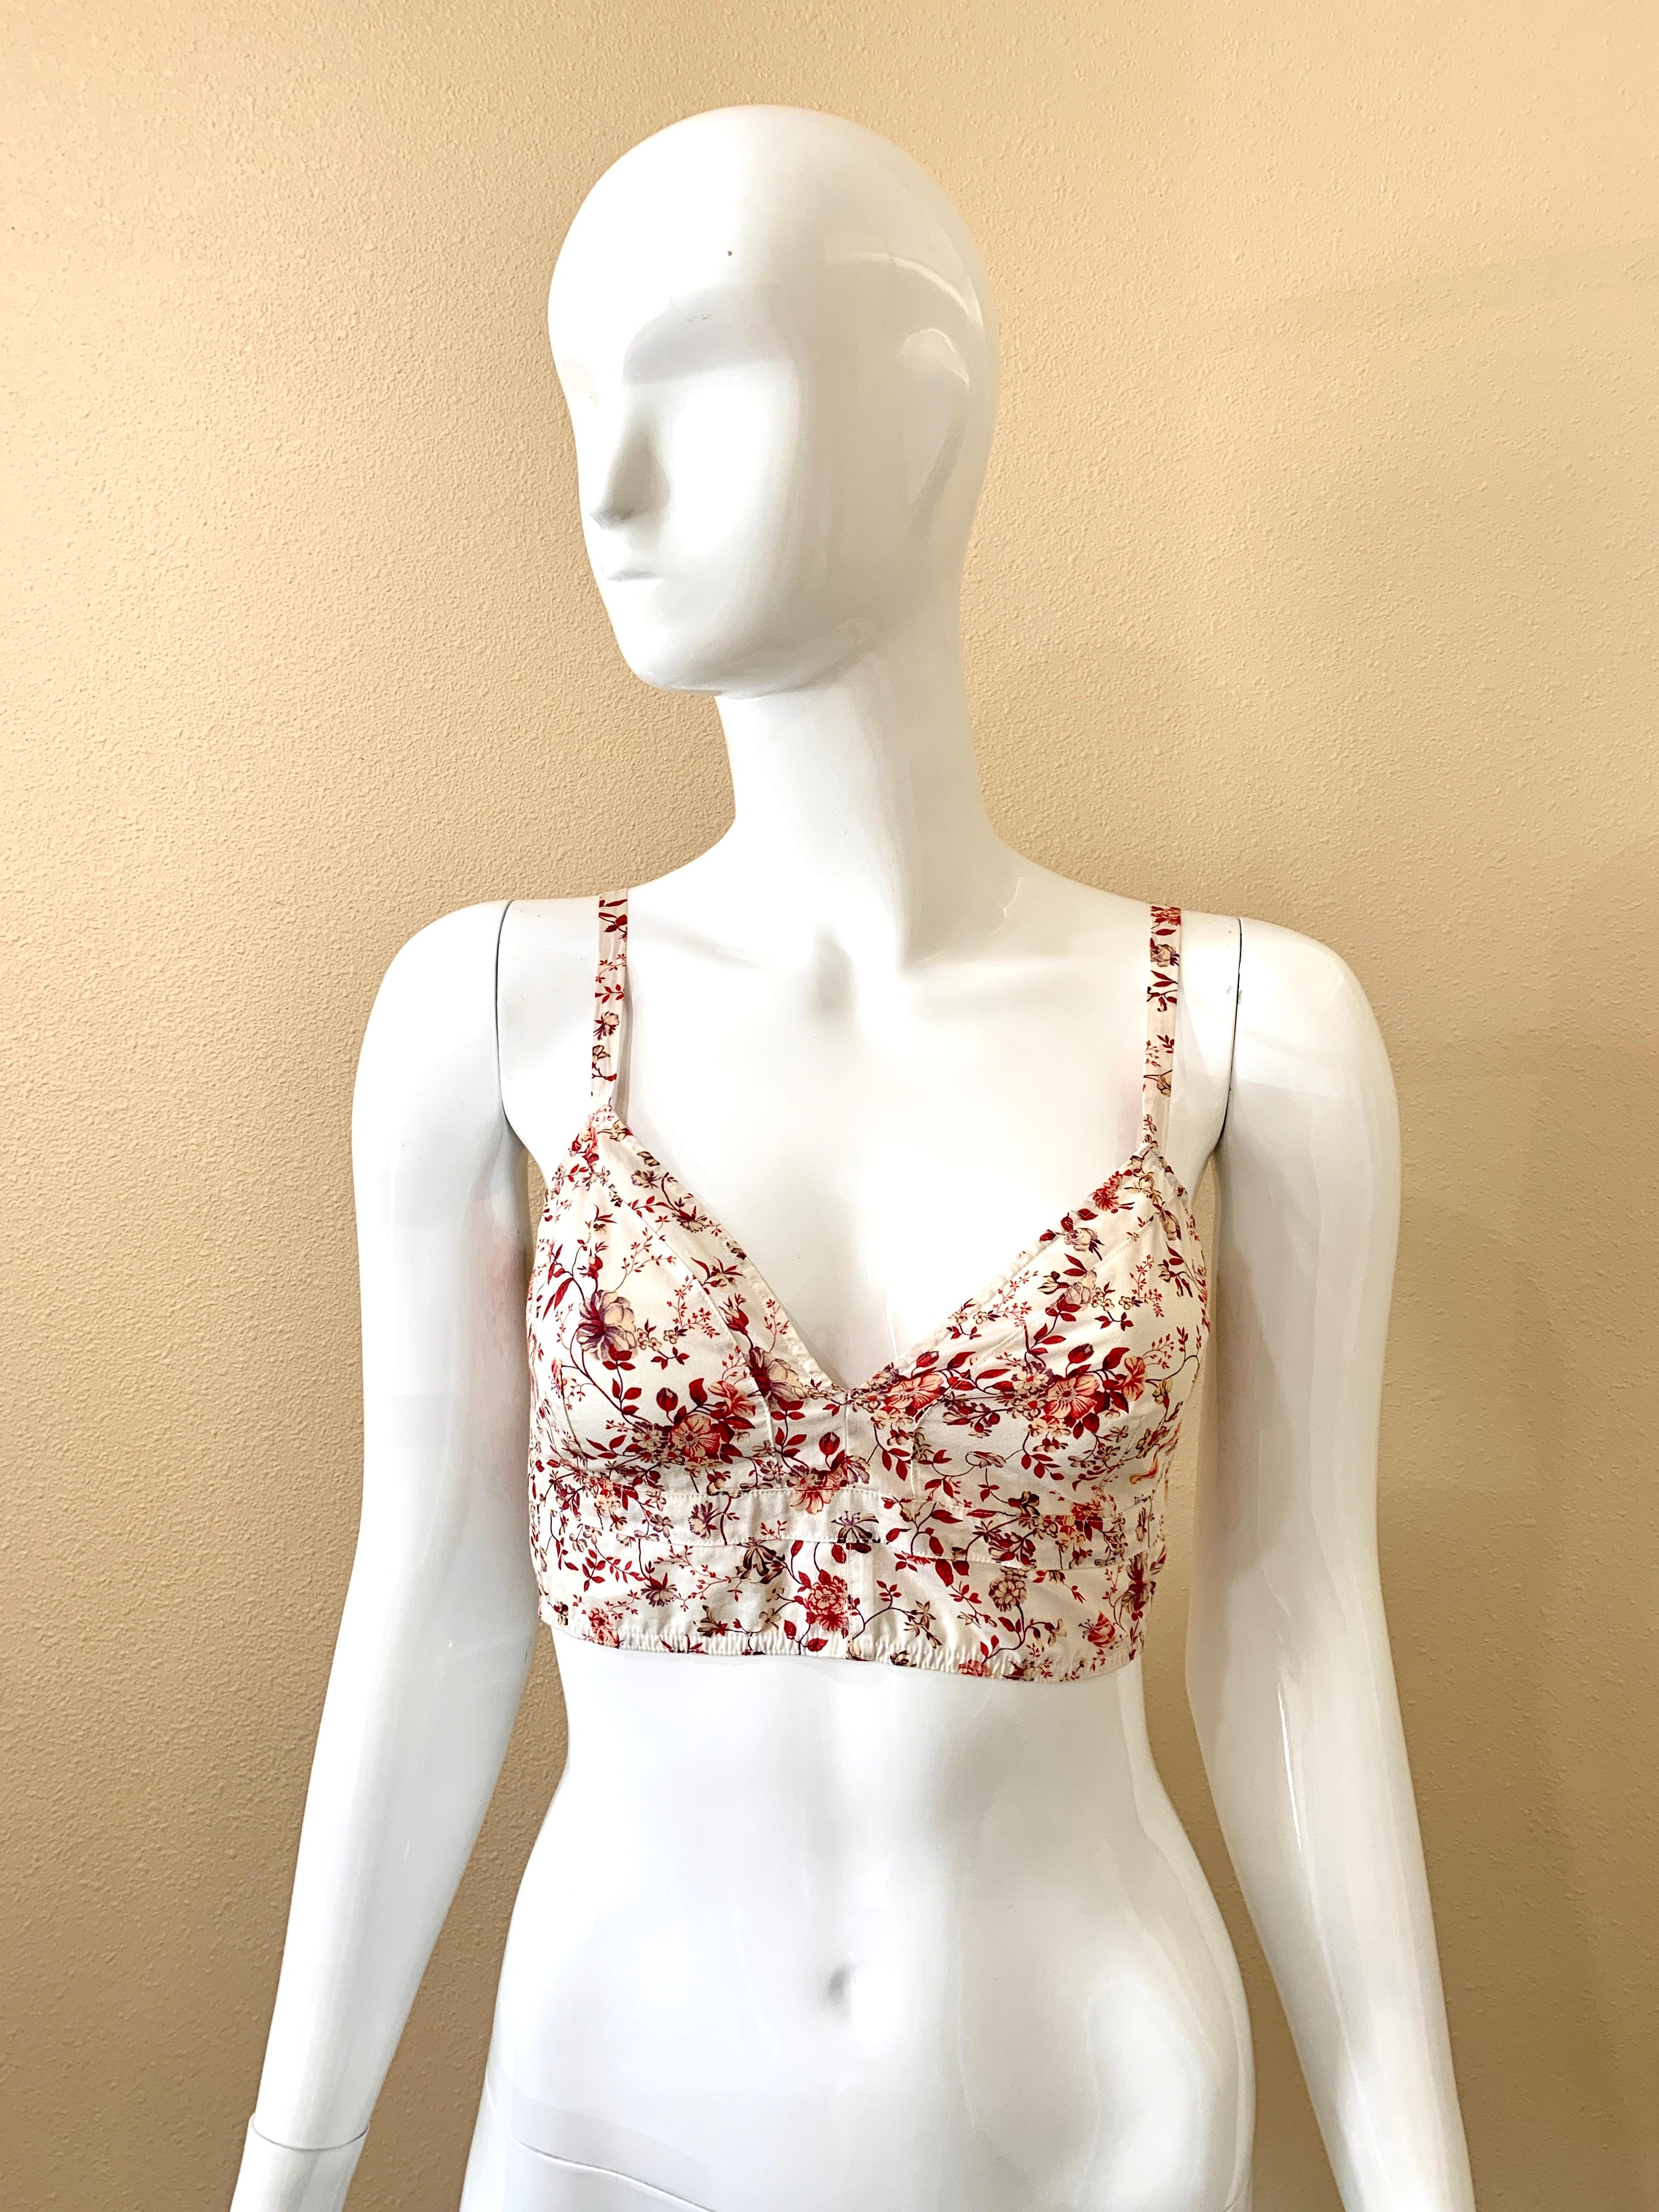 Etro Bralette in floral paisley. 
Size 38. 
Super fresh and flirty for spring/summer.  Great as resort wear or an option for under a blazer or cardigan. 
Adjustable shoulder straps and flexibility in the back for different sizes of rib cages. 
Tag